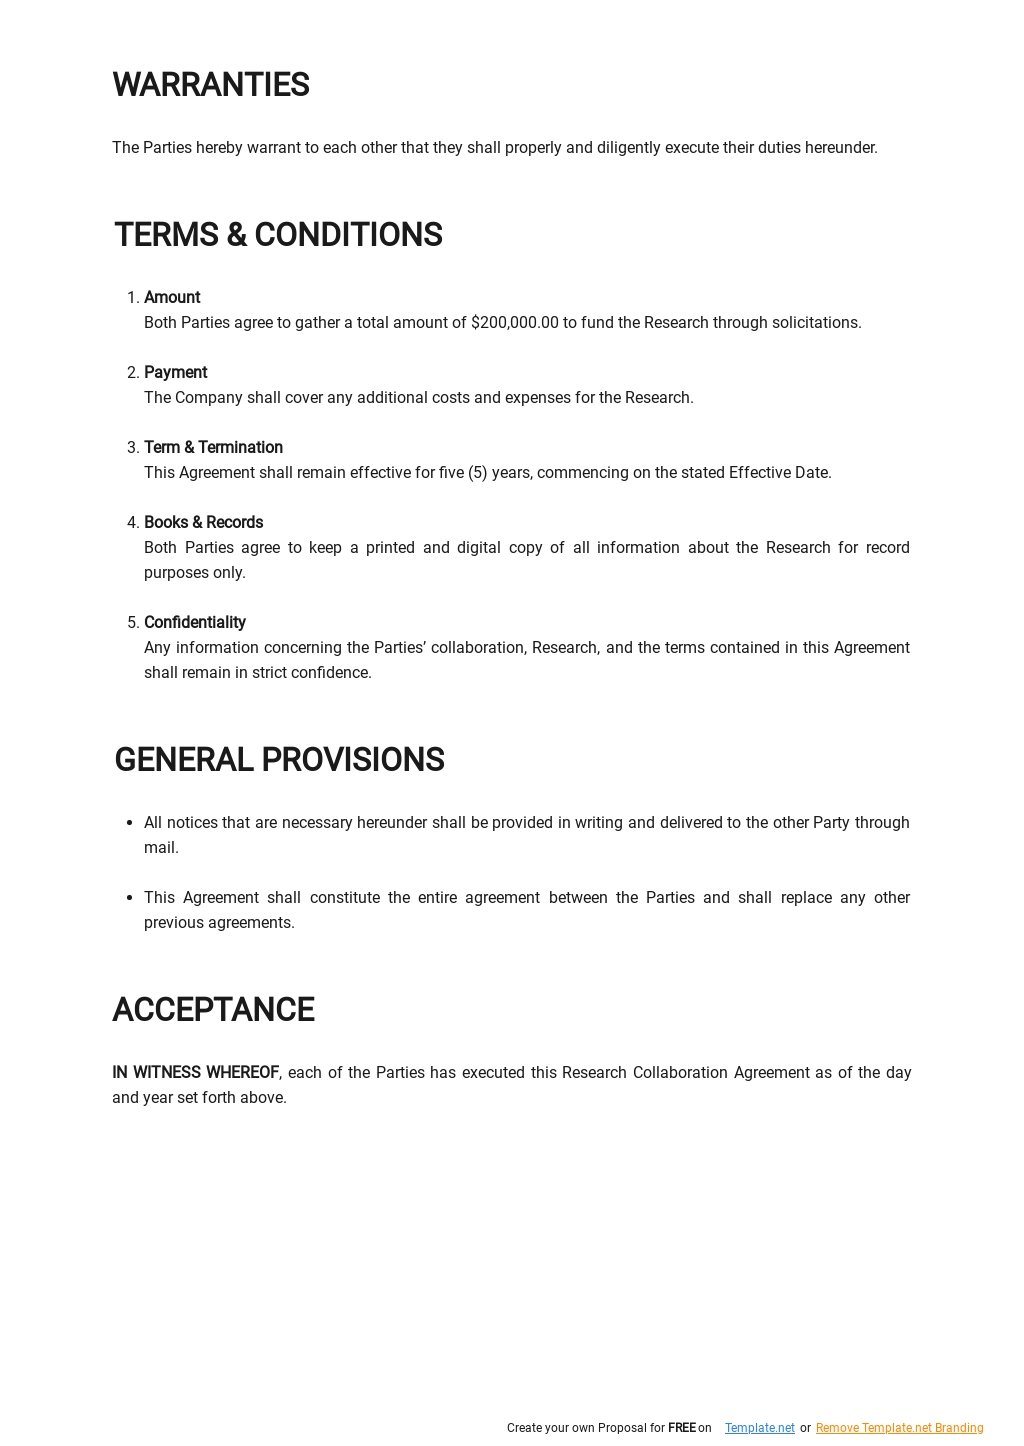 Simple Research Collaboration Agreement Template Free PDF Template net